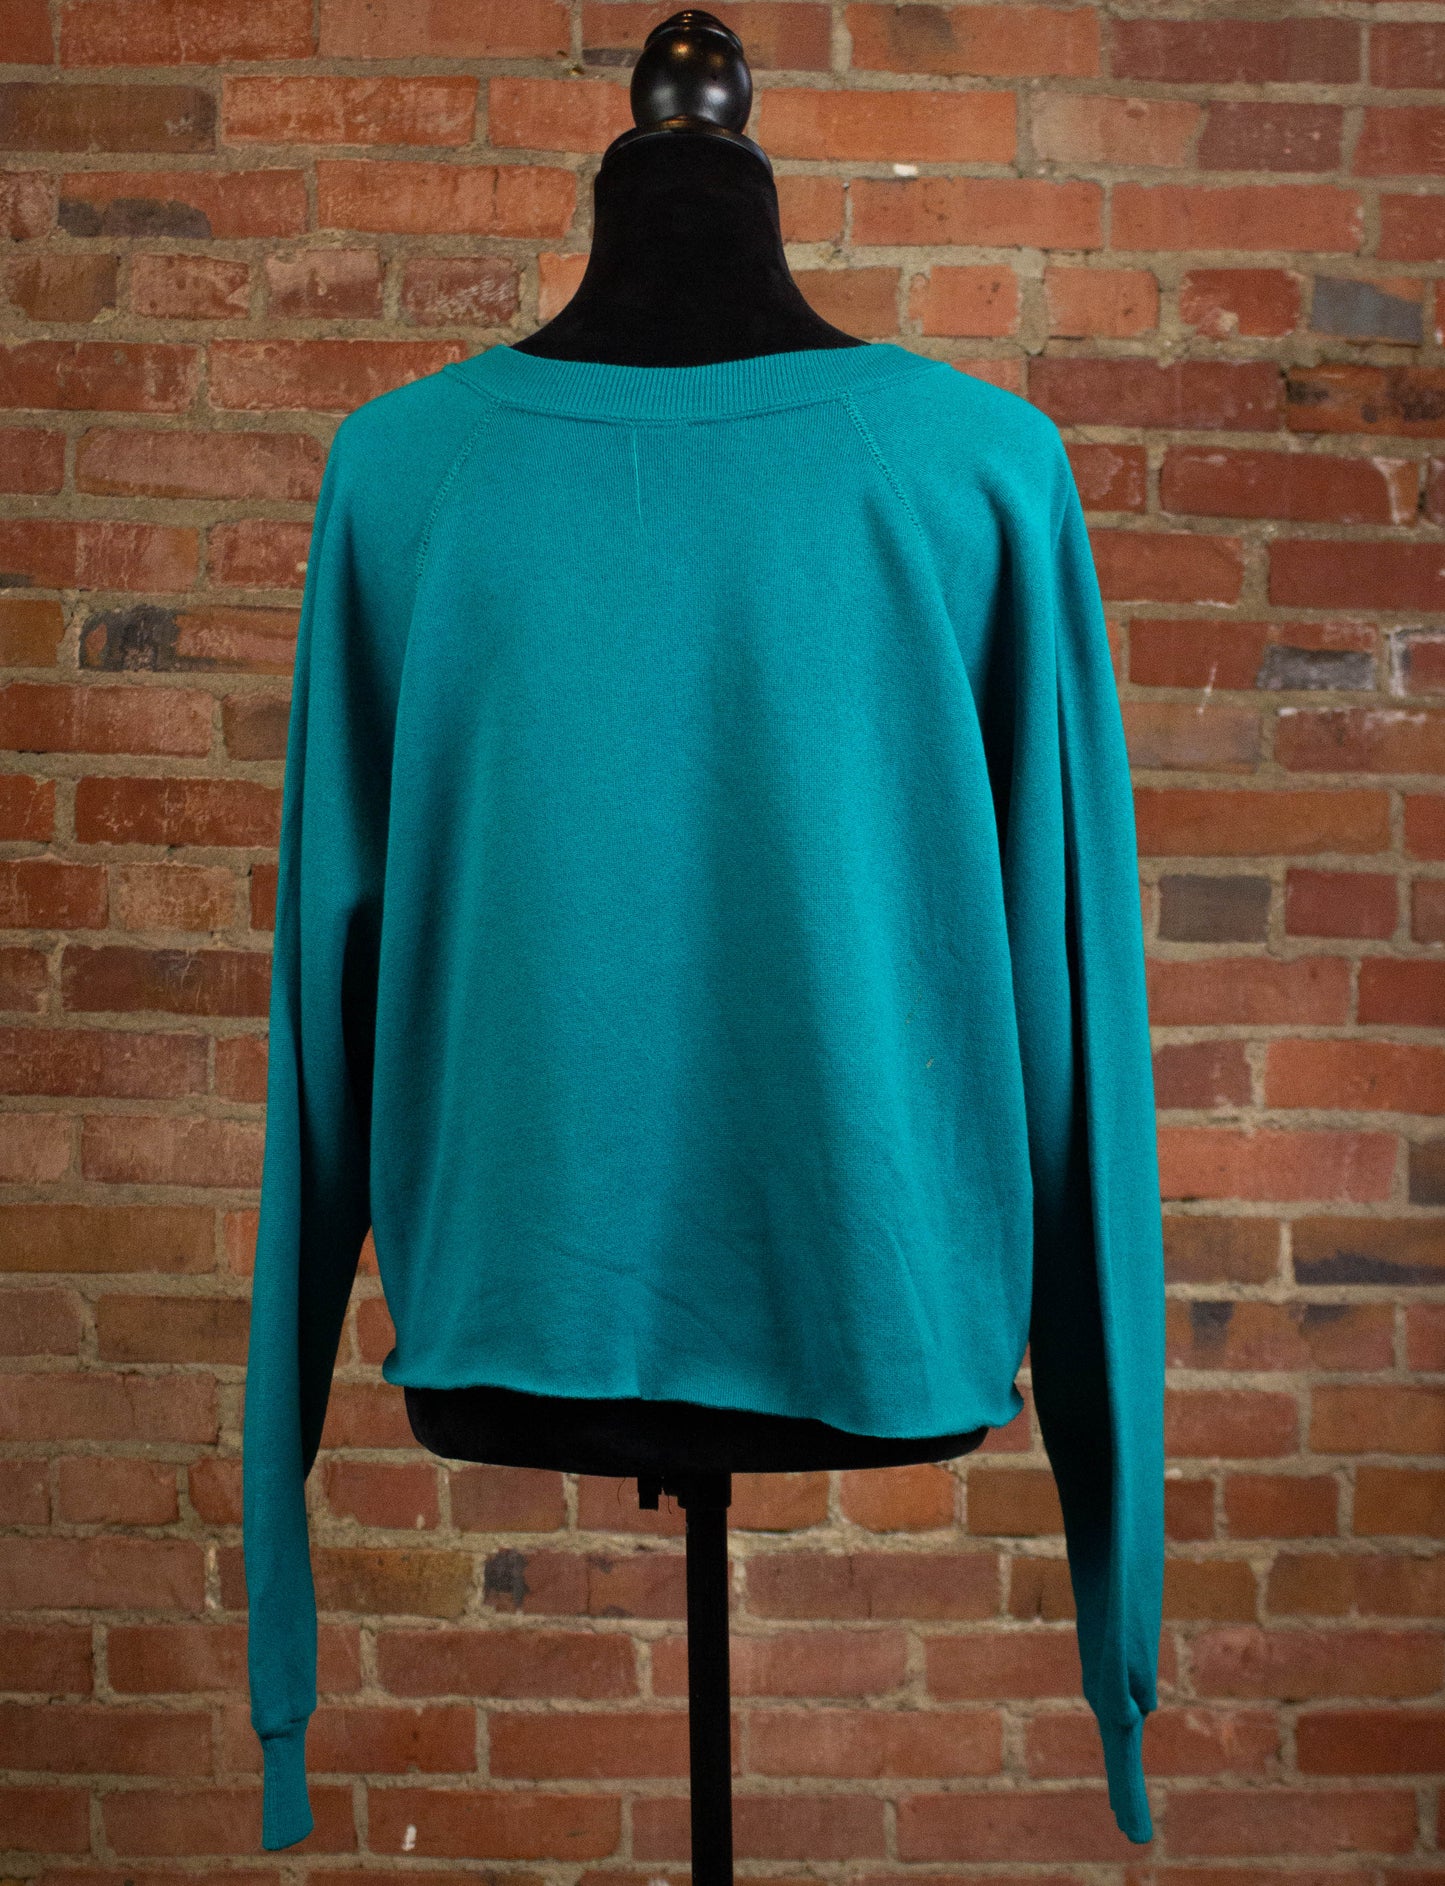 Vintage 1989 "Touch of Class" Rose Cropped Sweatshirt Teal XL